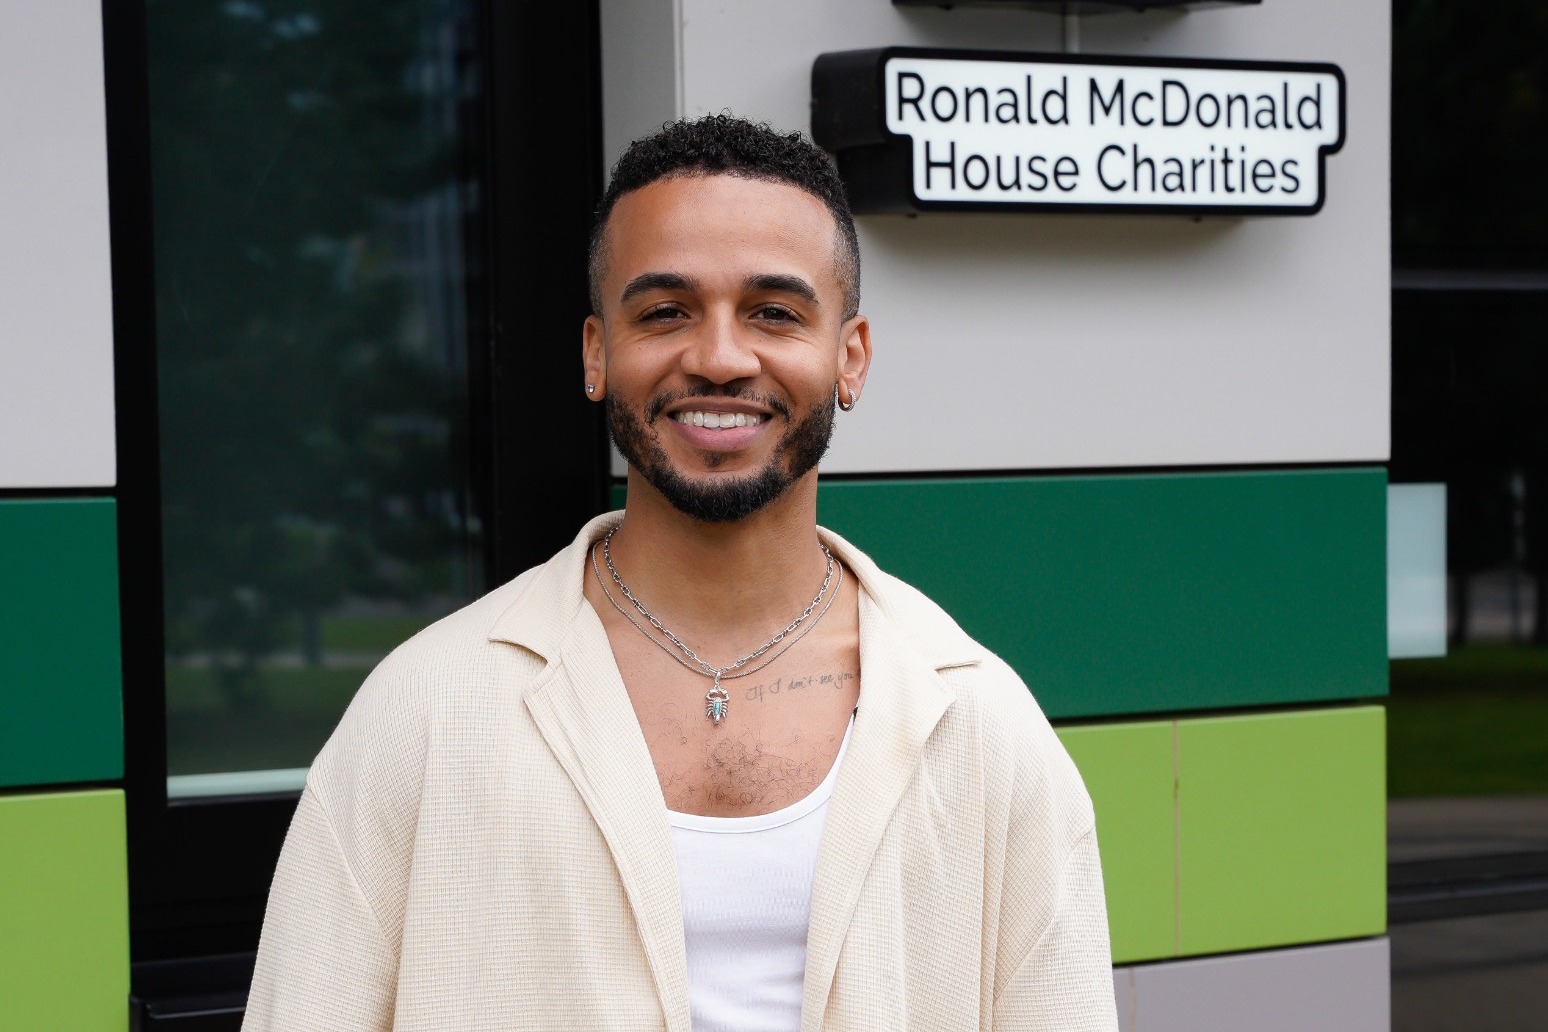 JLS star Aston Merrygold ties the knot with girlfriend of 10 years 